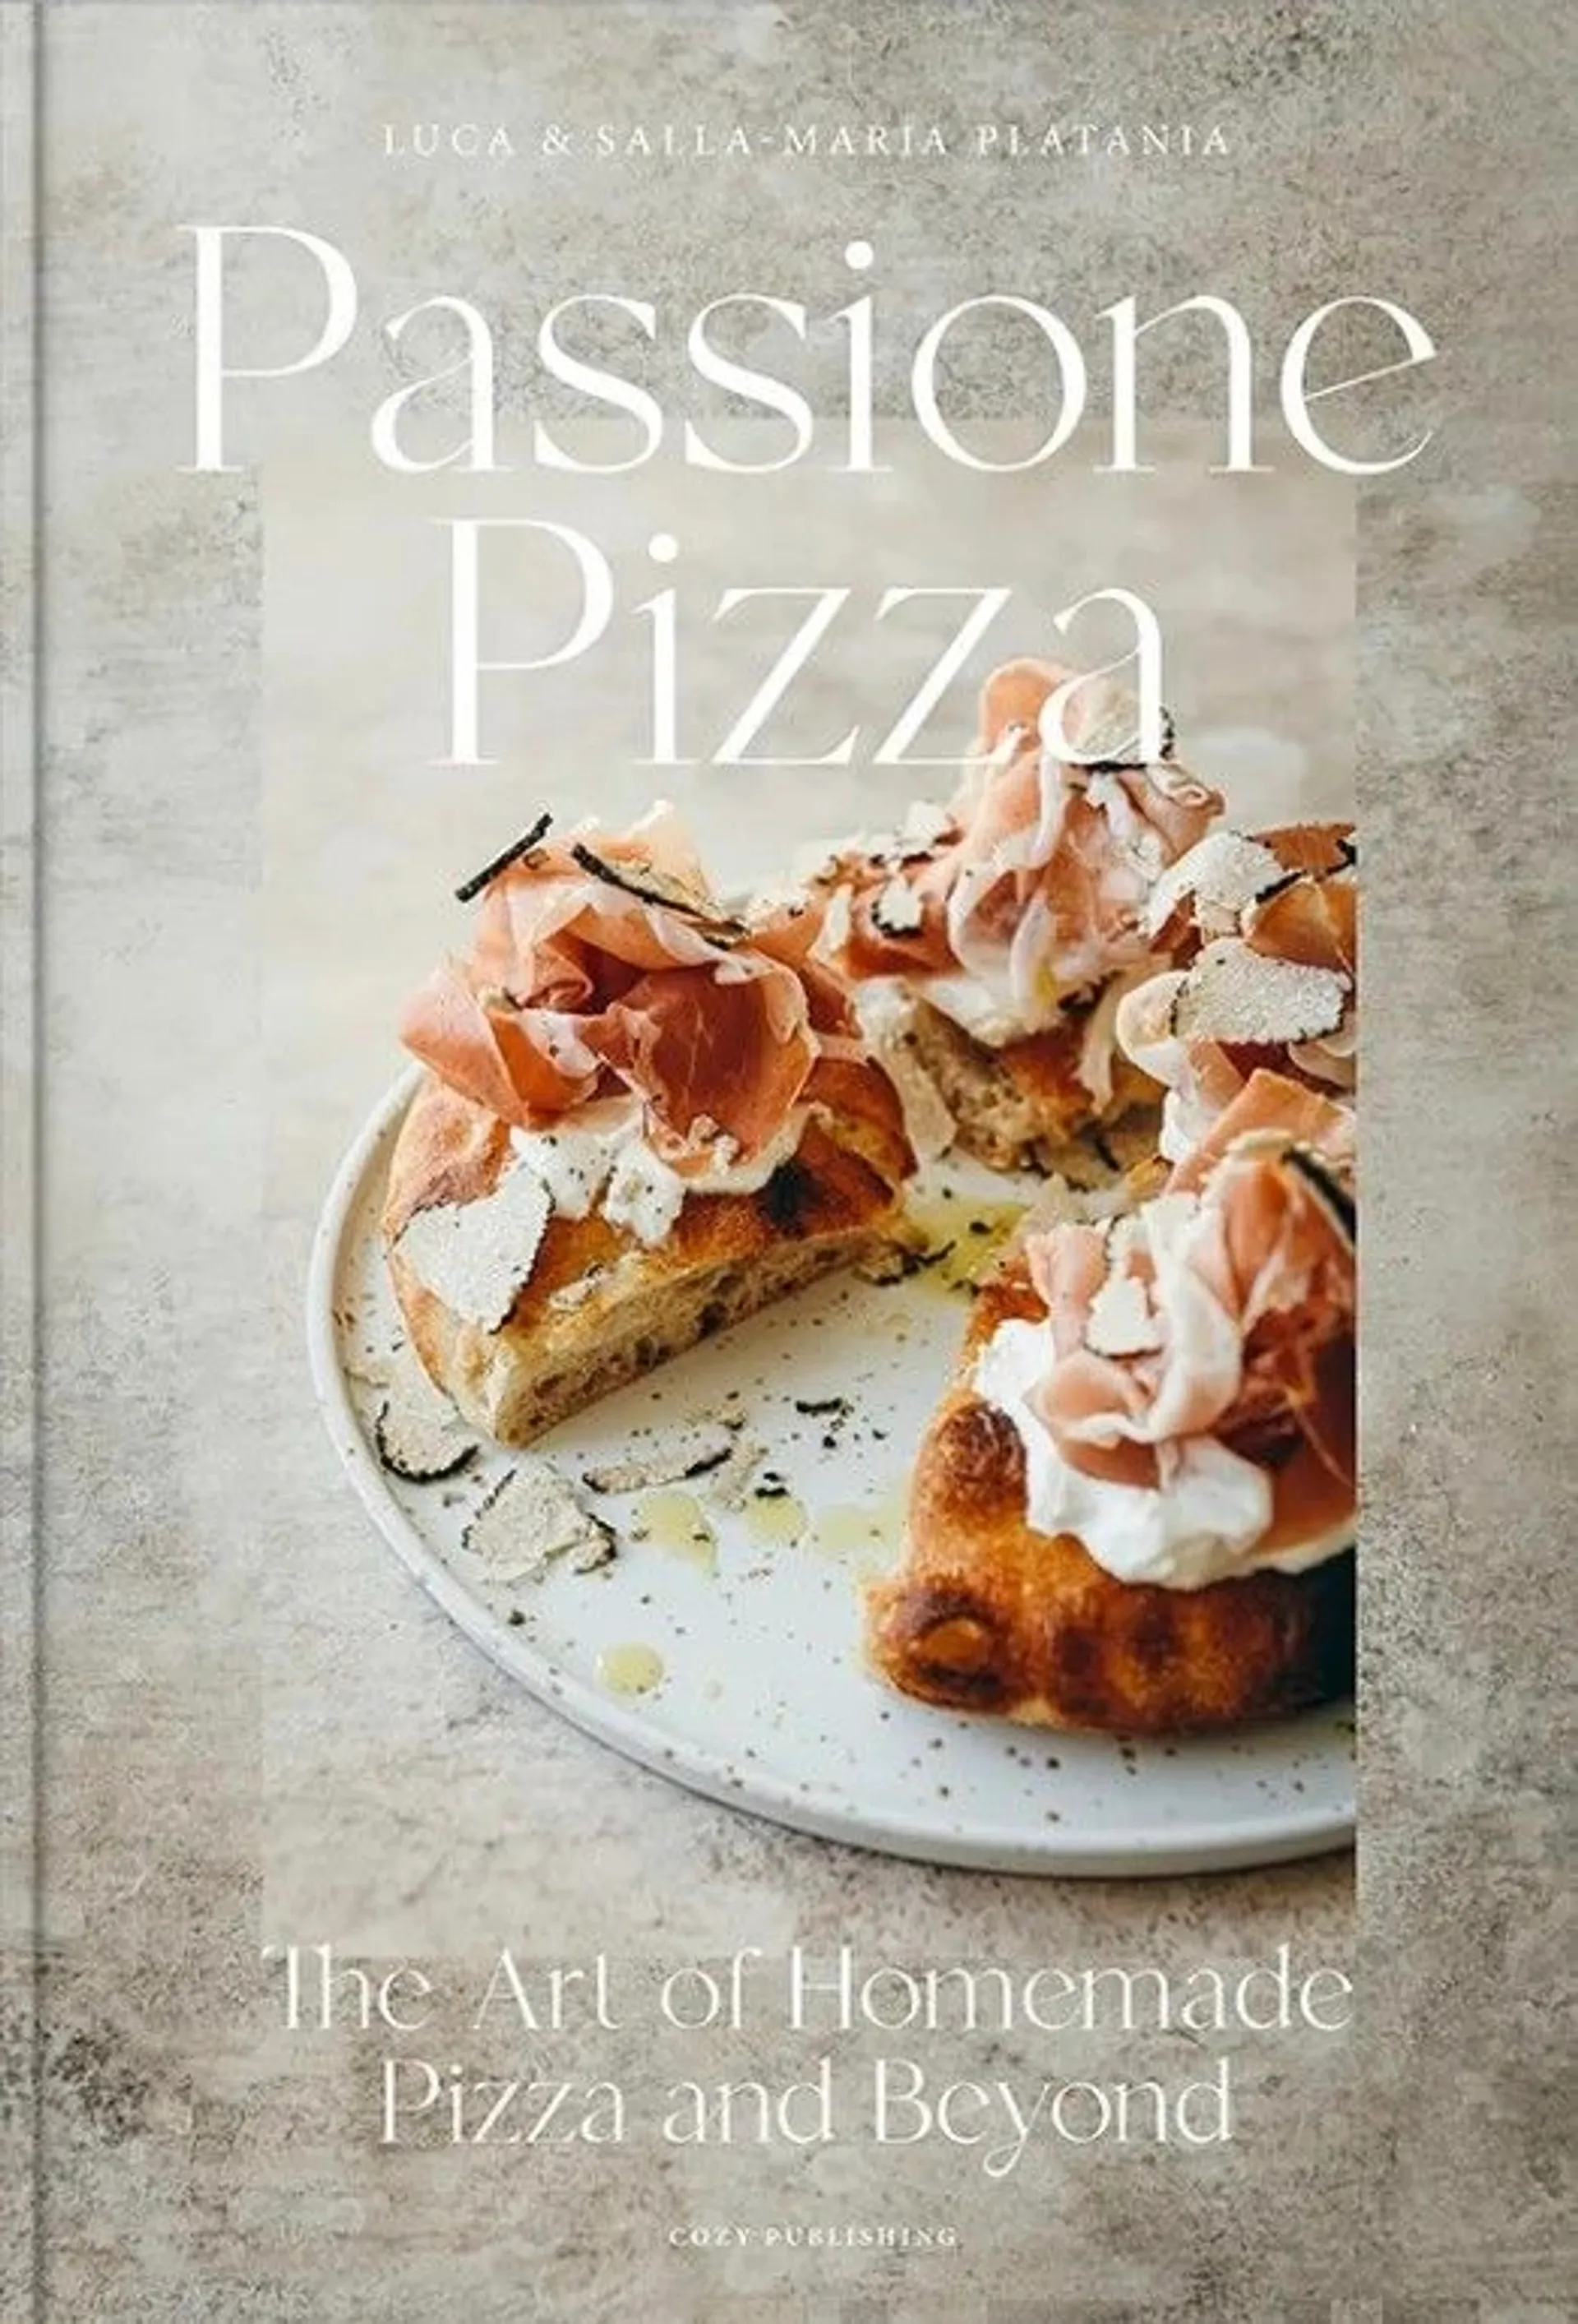 Platania, Passione Pizza - The Art of Homemade Pizza and Beyond